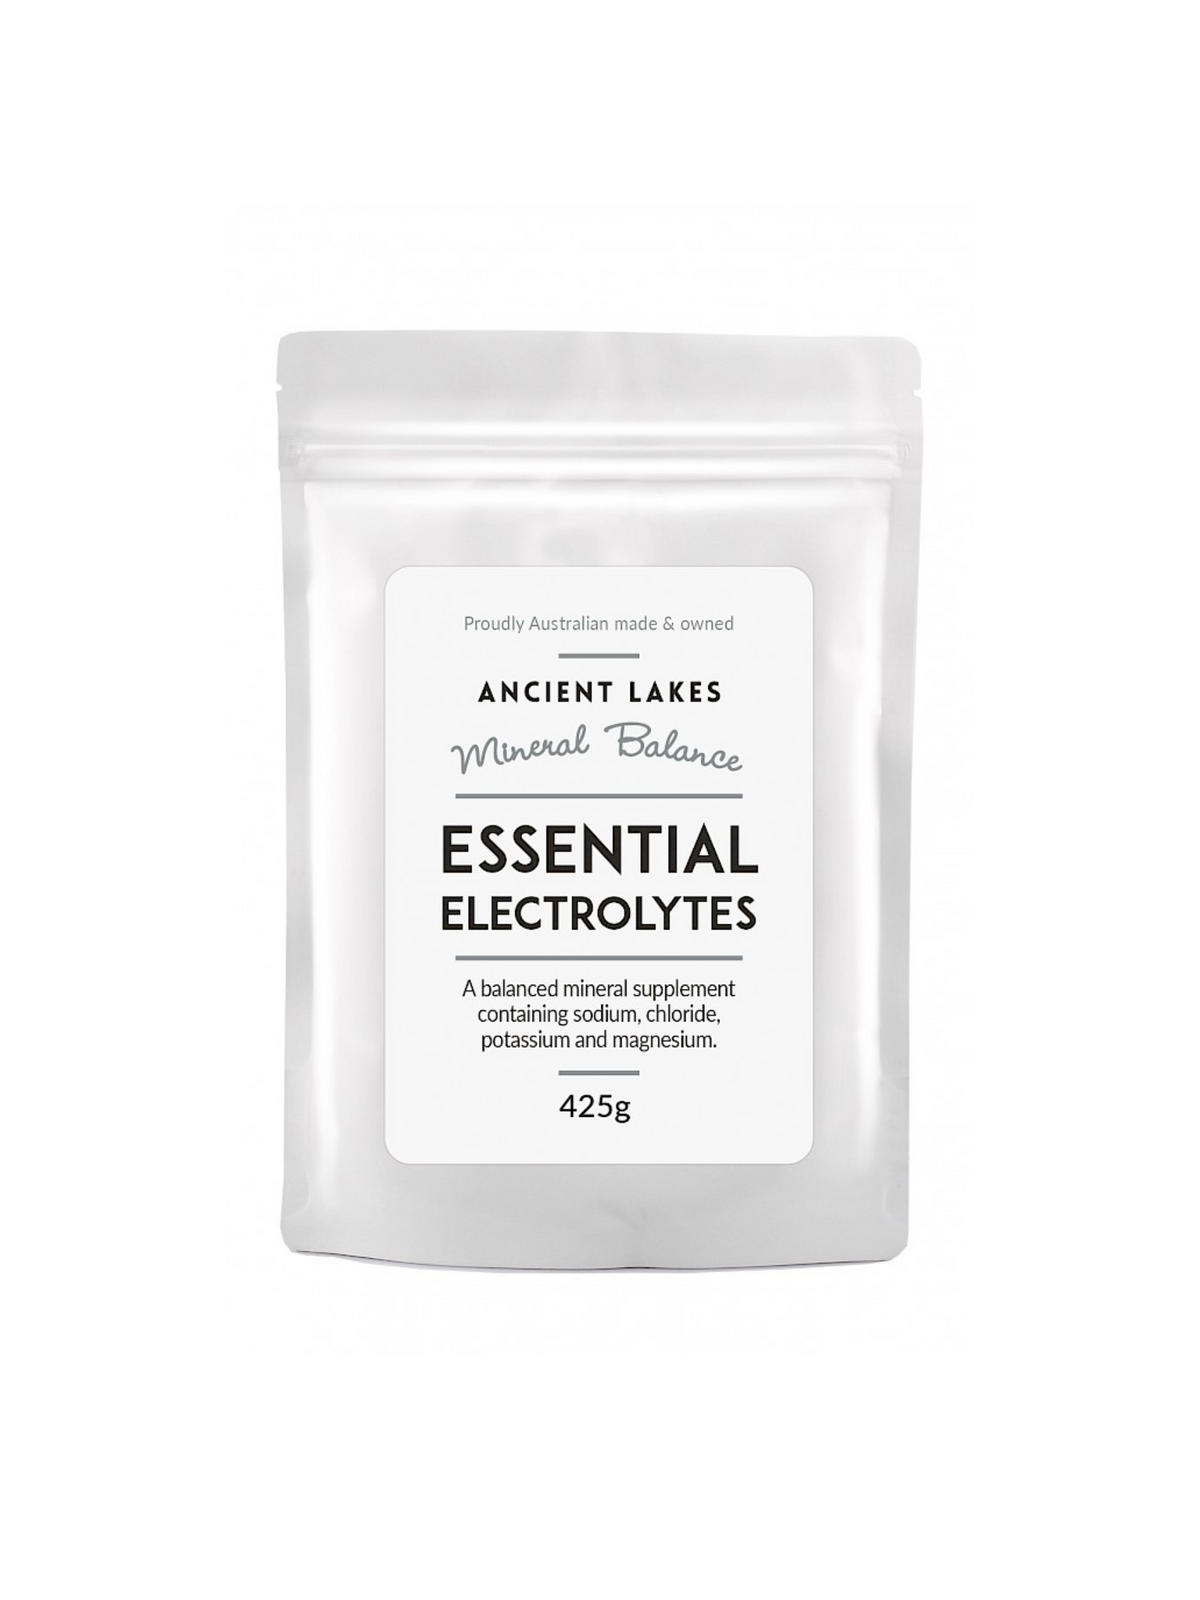 Ancient Lakes Mineral Balance - Essential Electrolytes